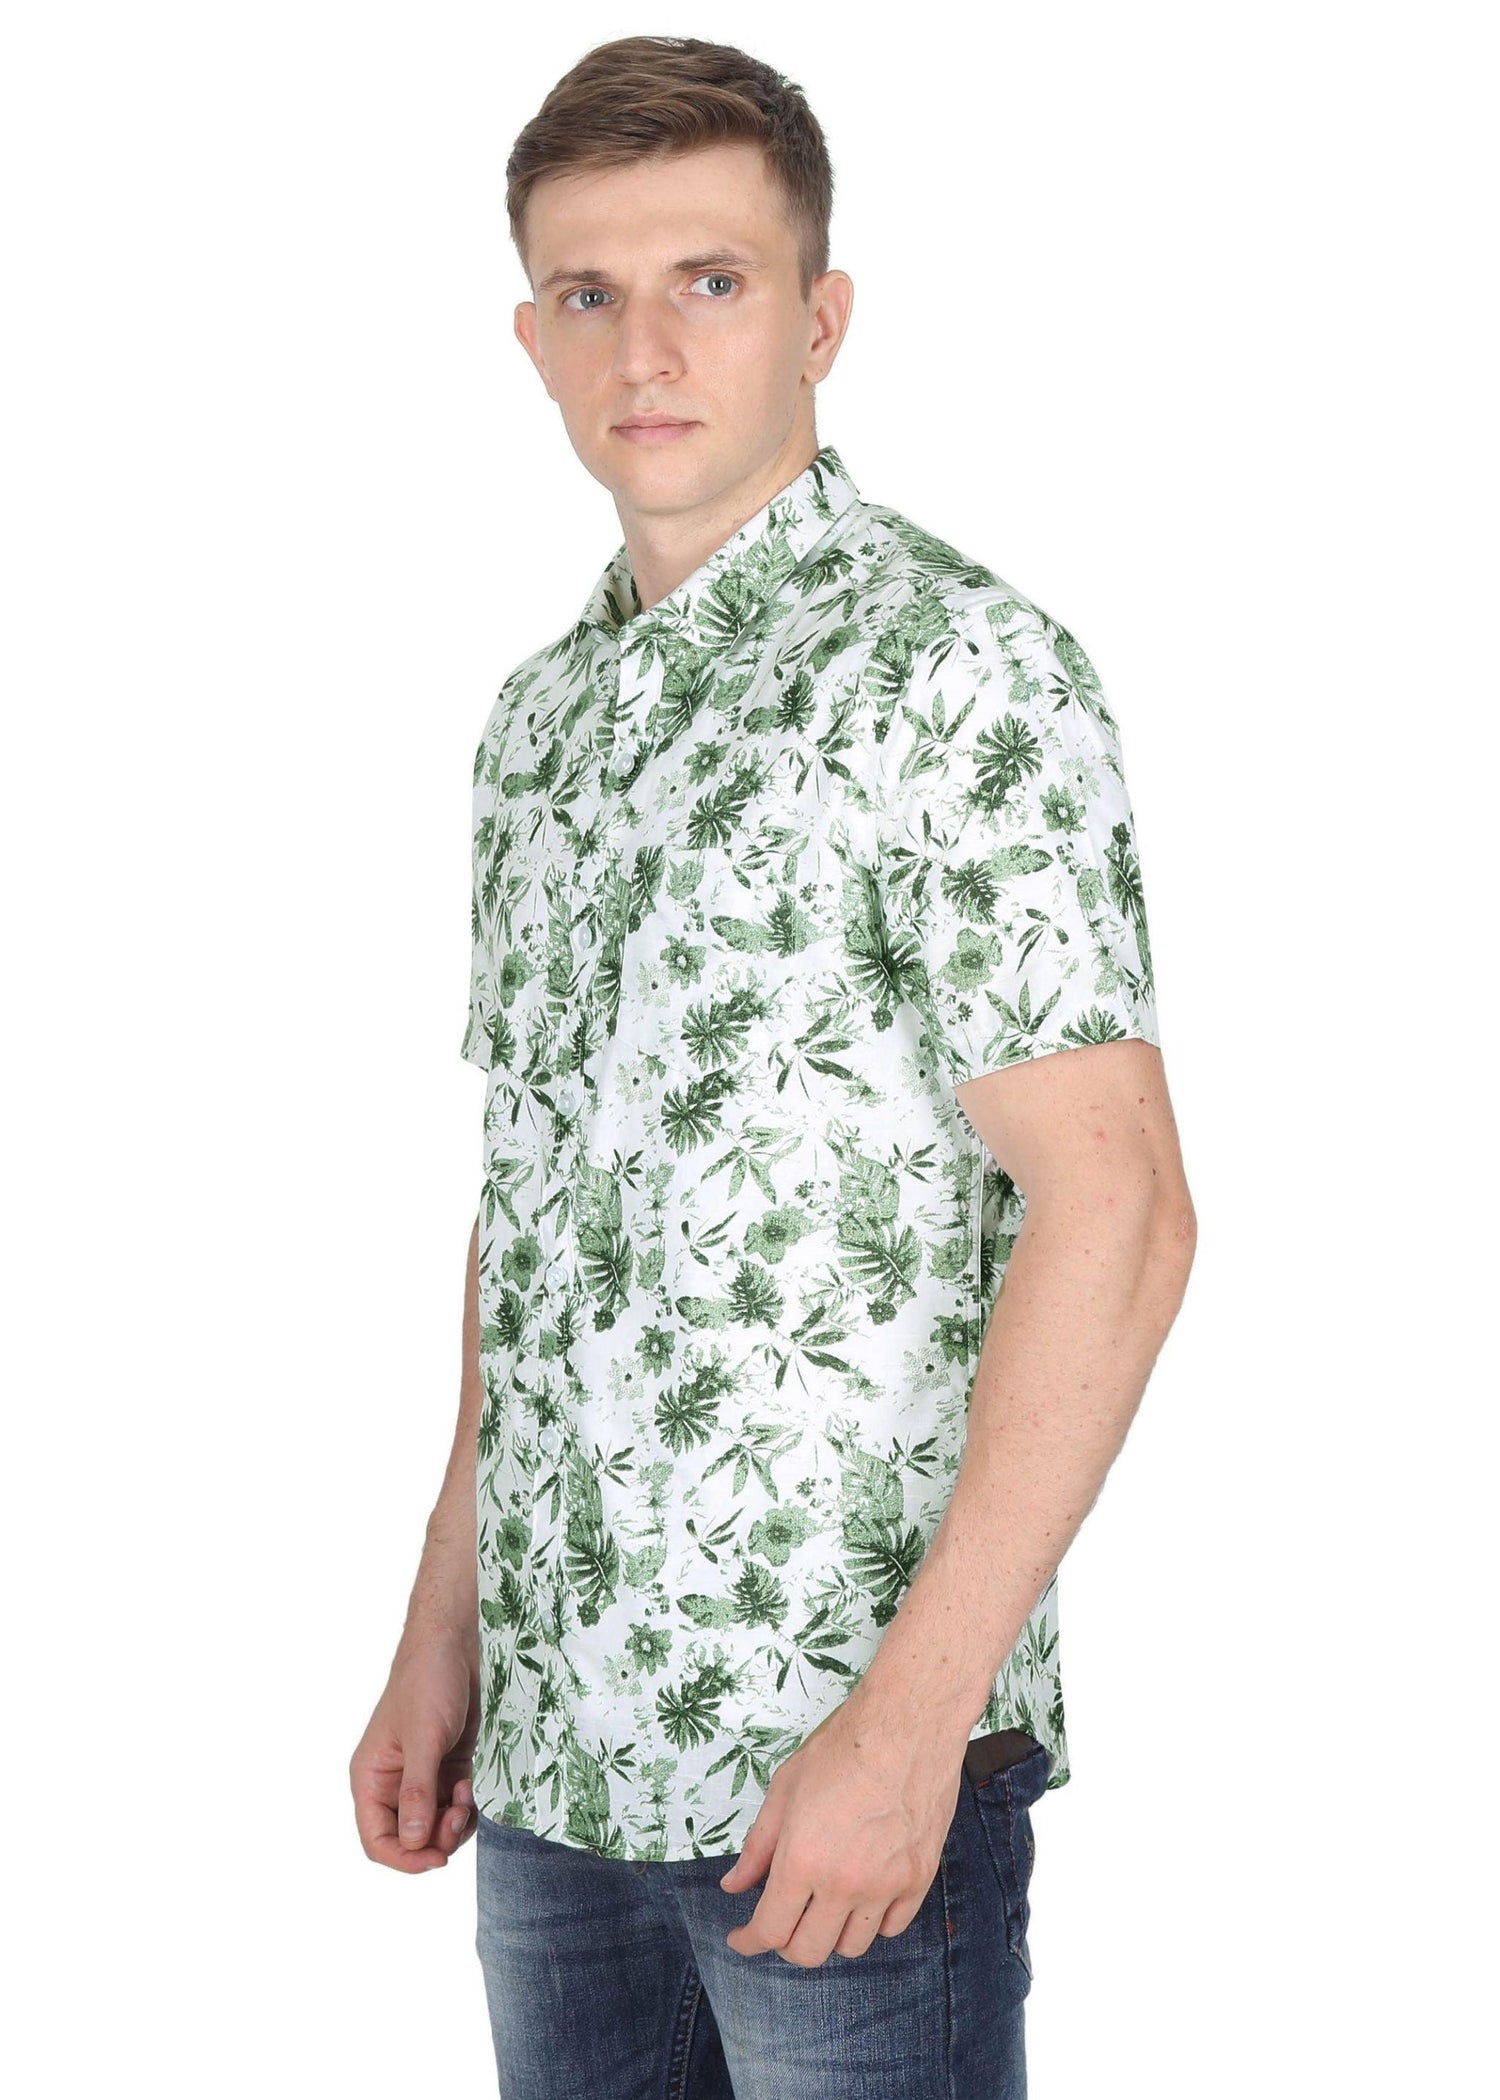 Tusok-orchardFeatured Shirt, Vacation-Printed Shirtimage-Green Linen (2)